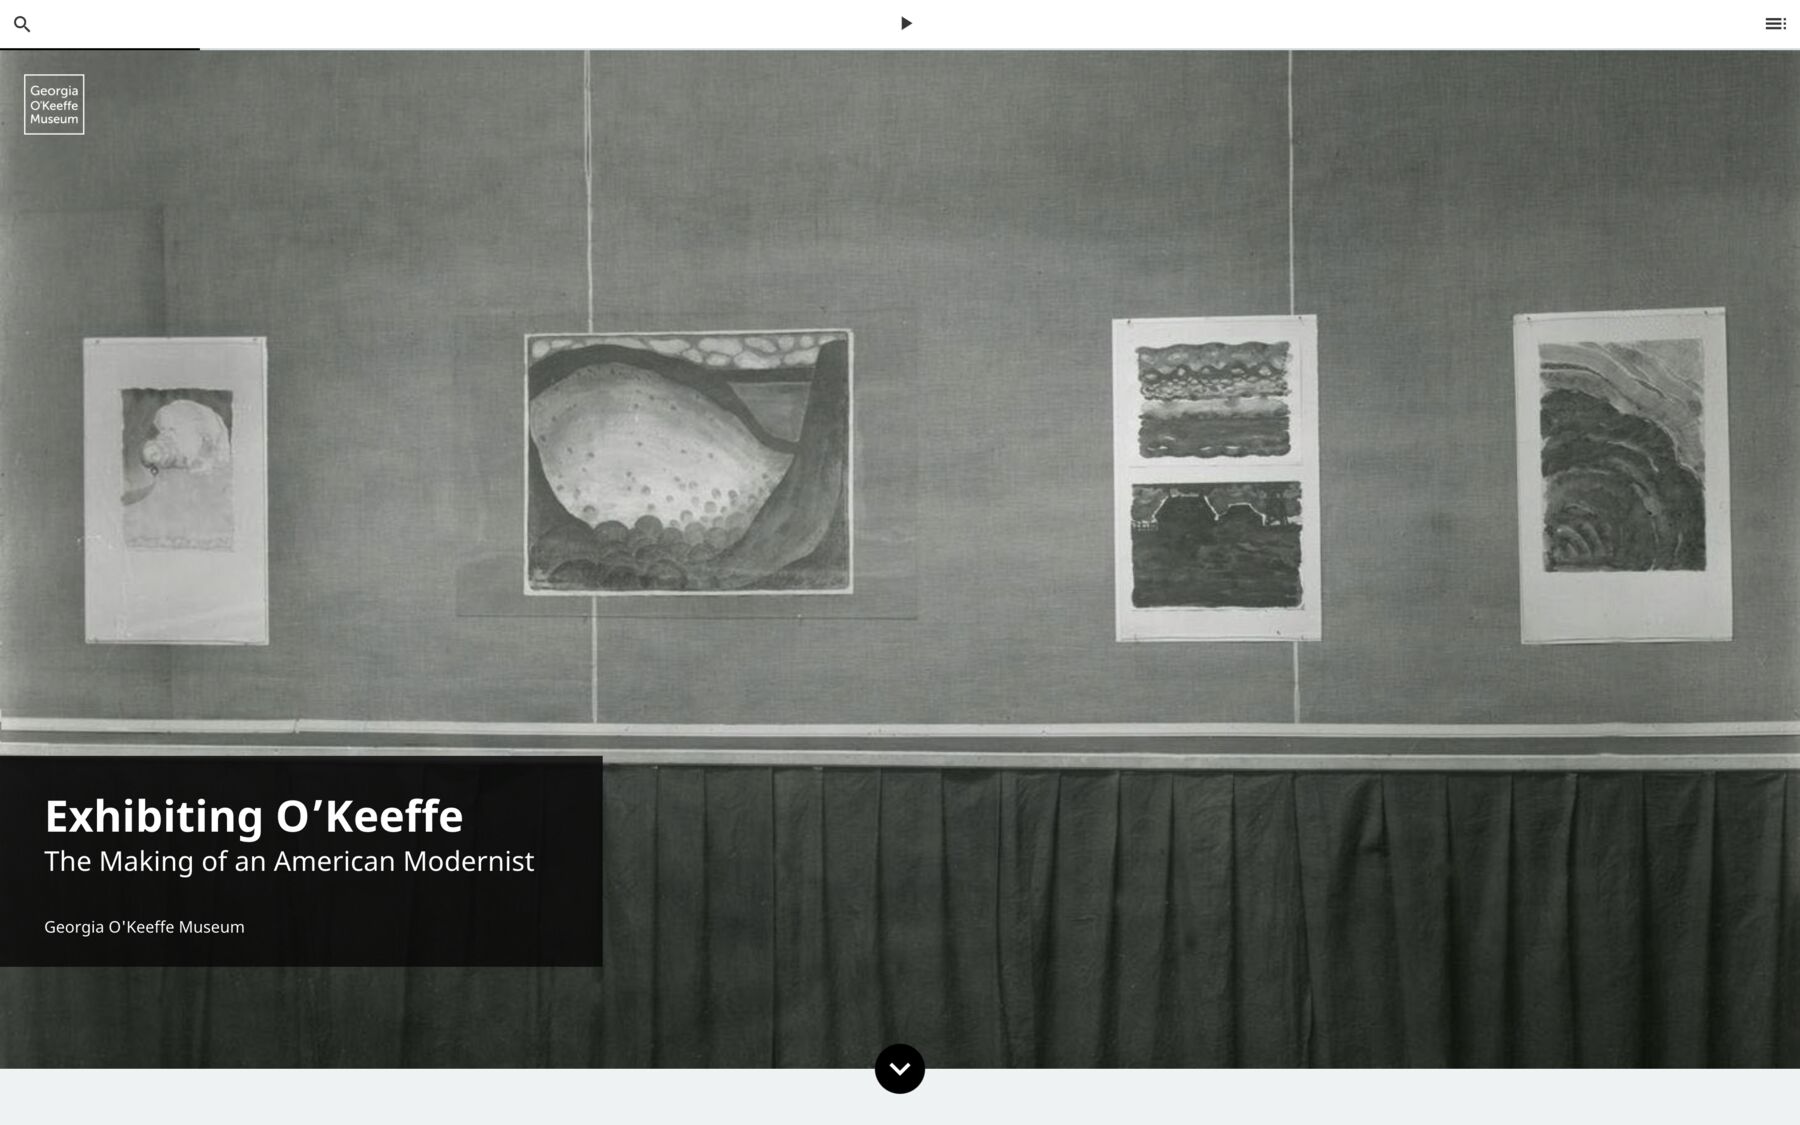 Exhibiting O'Keeffe: The Making of an American Modernist, Georgia O'Keeffe Museum